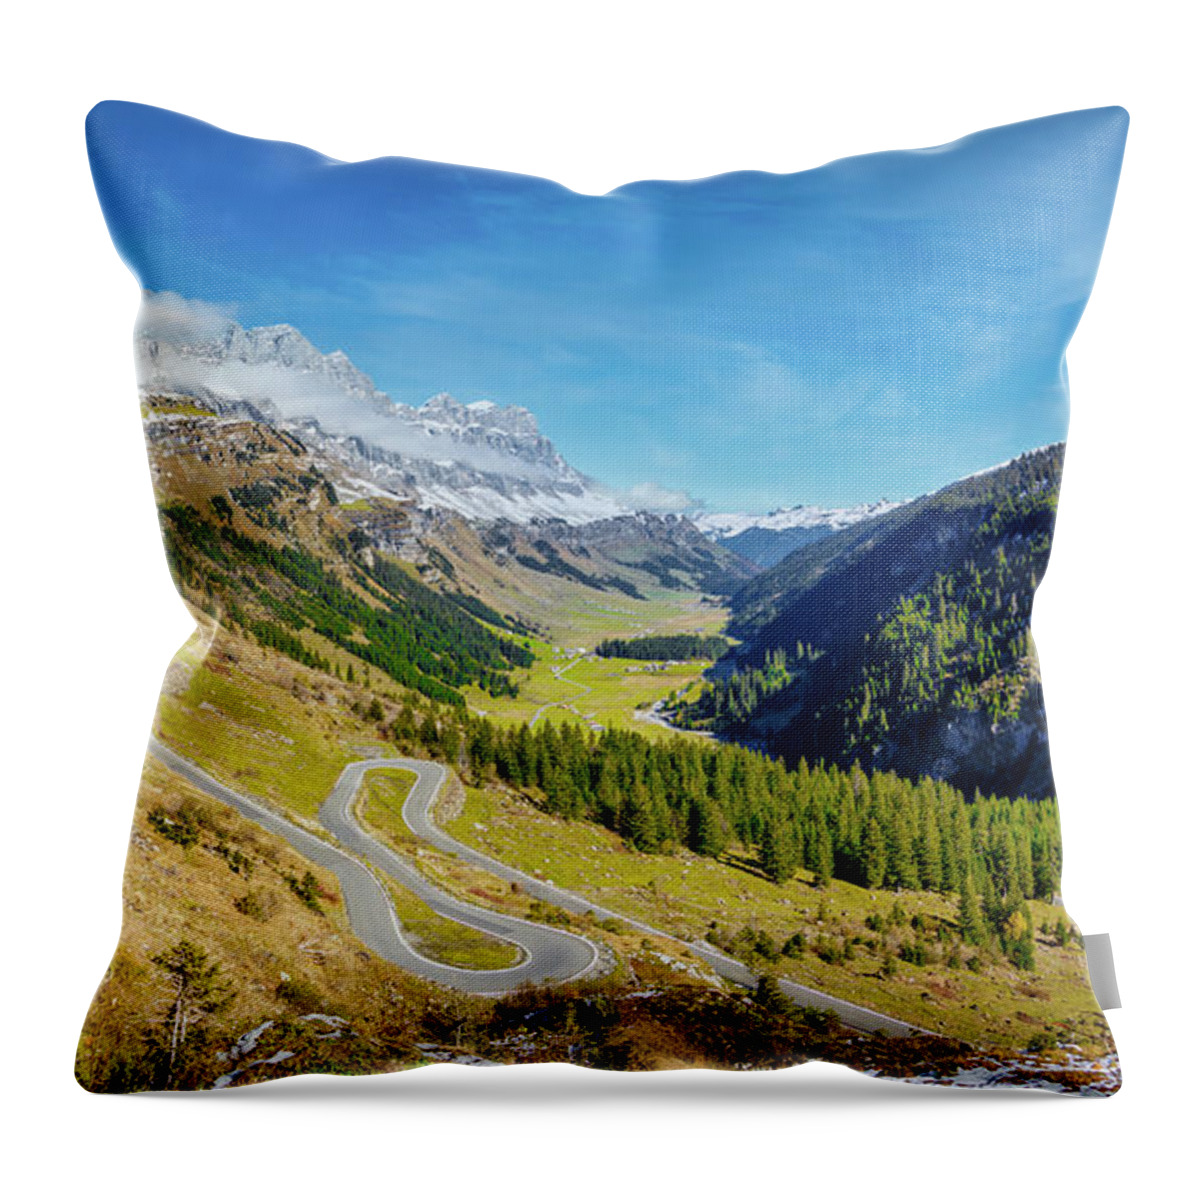 Landscape Throw Pillow featuring the photograph Klausenpass Panorama, Switzerland by Rick Deacon